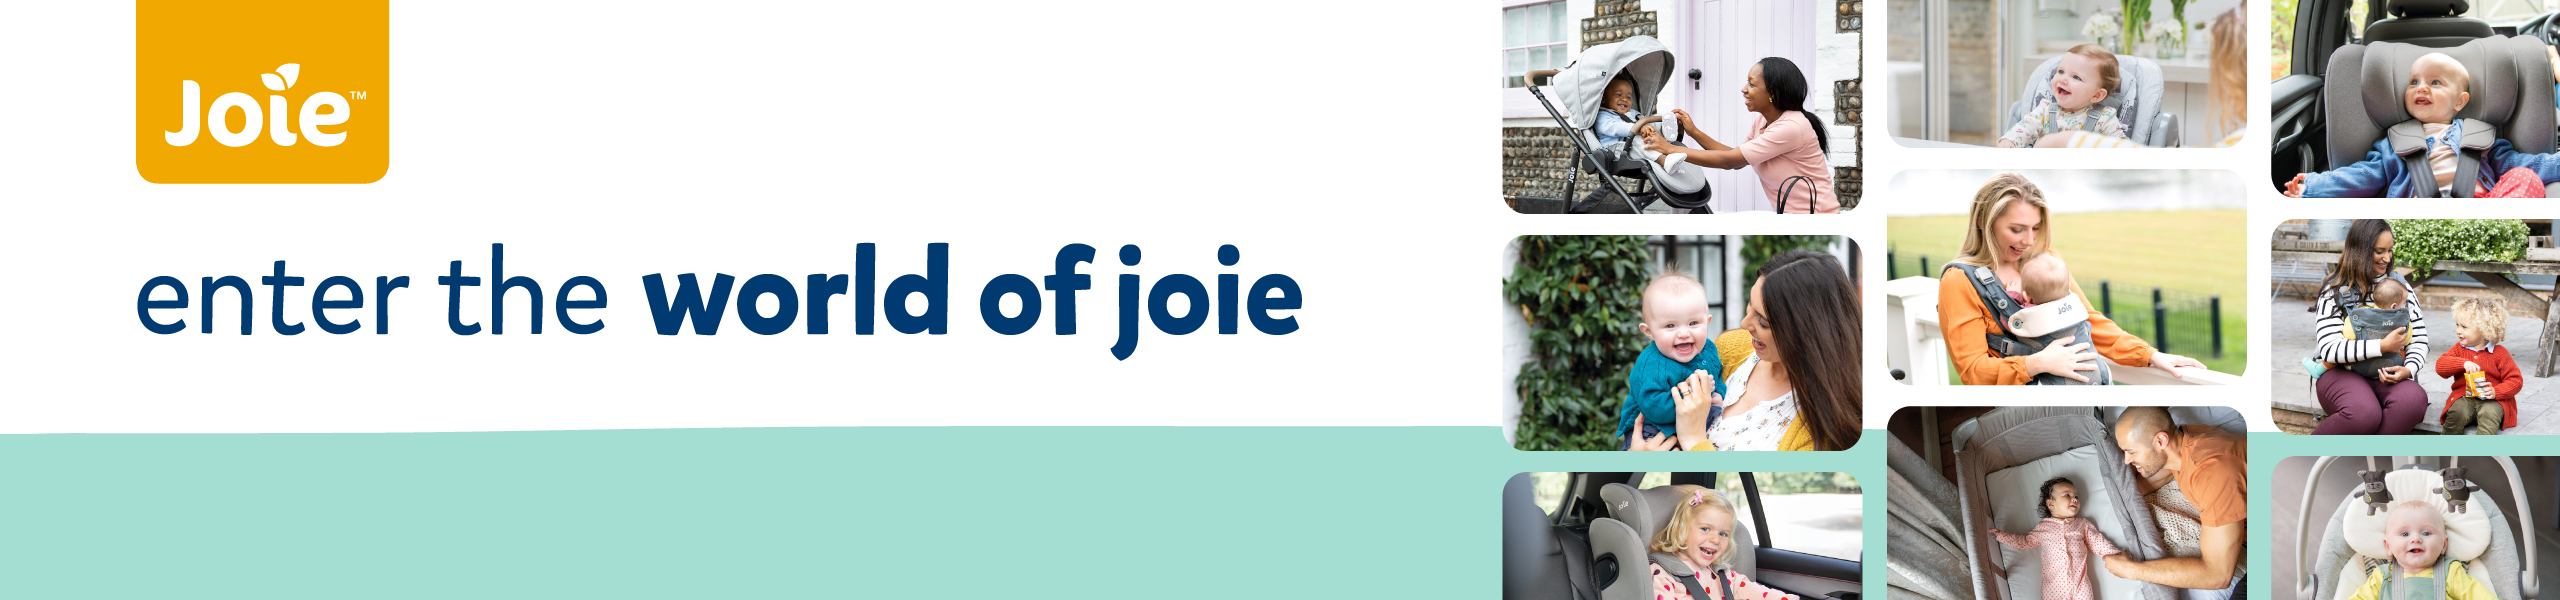 Joie Brand Page